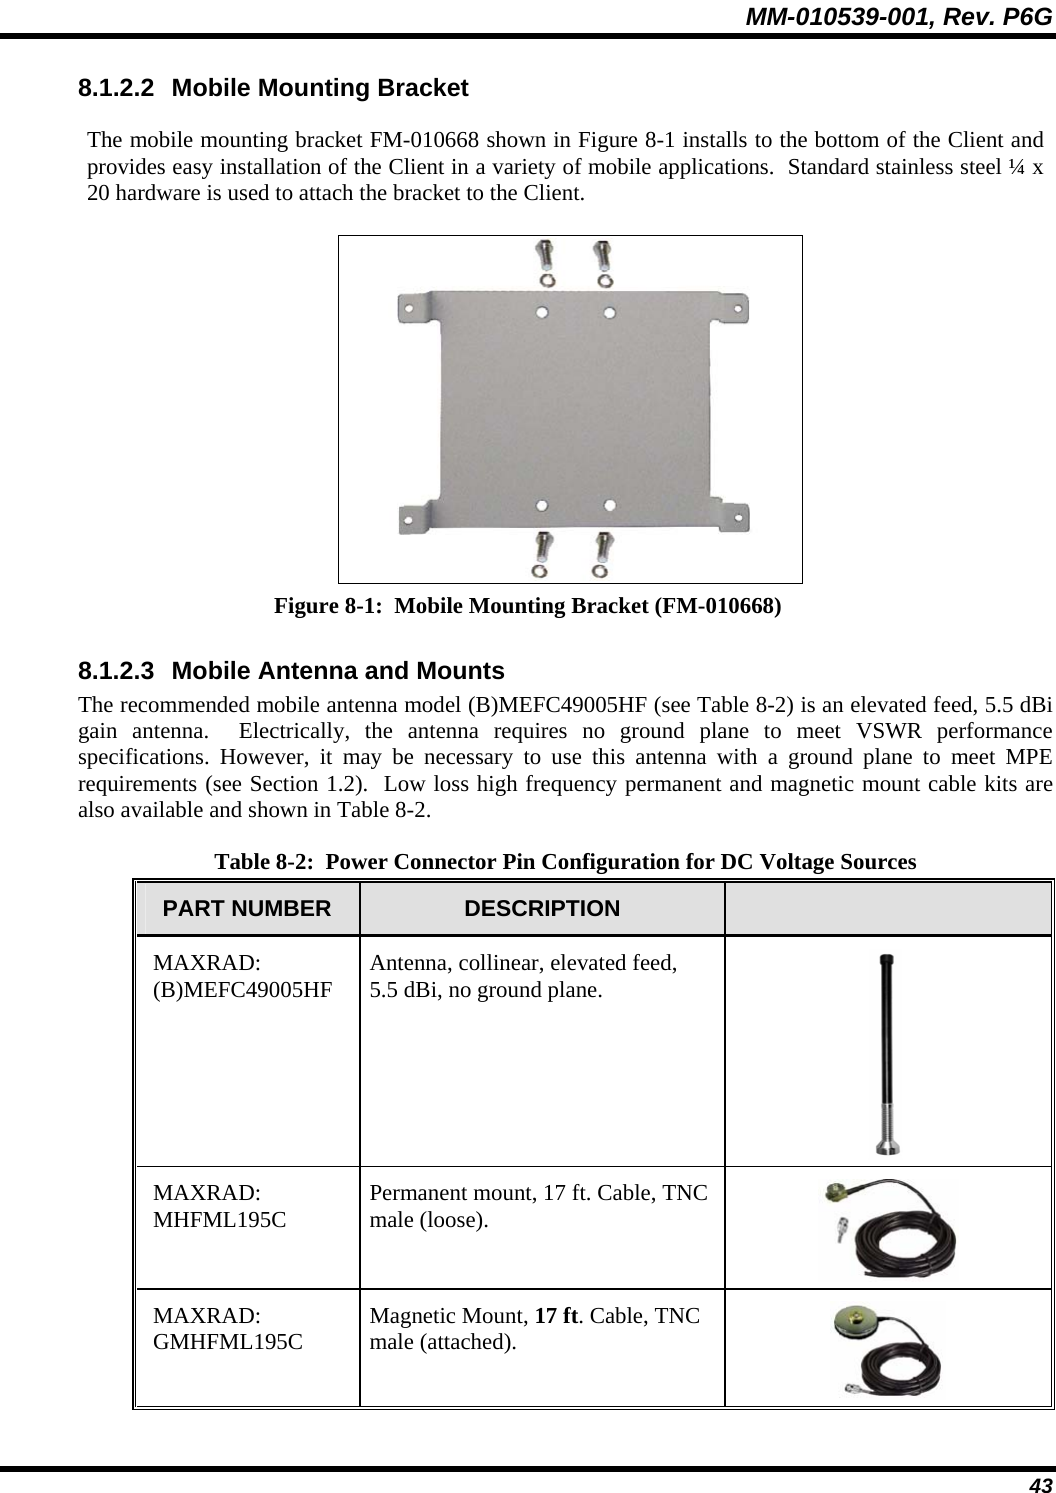 MM-010539-001, Rev. P6G  43 8.1.2.2  Mobile Mounting Bracket The mobile mounting bracket FM-010668 shown in Figure 8-1 installs to the bottom of the Client and provides easy installation of the Client in a variety of mobile applications.  Standard stainless steel ¼ x 20 hardware is used to attach the bracket to the Client.  Figure 8-1:  Mobile Mounting Bracket (FM-010668) 8.1.2.3  Mobile Antenna and Mounts The recommended mobile antenna model (B)MEFC49005HF (see Table 8-2) is an elevated feed, 5.5 dBi gain antenna.  Electrically, the antenna requires no ground plane to meet VSWR performance specifications. However, it may be necessary to use this antenna with a ground plane to meet MPE requirements (see Section 1.2).  Low loss high frequency permanent and magnetic mount cable kits are also available and shown in Table 8-2. Table 8-2:  Power Connector Pin Configuration for DC Voltage Sources PART NUMBER  DESCRIPTION   MAXRAD: (B)MEFC49005HF  Antenna, collinear, elevated feed, 5.5 dBi, no ground plane.  MAXRAD: MHFML195C  Permanent mount, 17 ft. Cable, TNC male (loose).  MAXRAD: GMHFML195C  Magnetic Mount, 17 ft. Cable, TNC male (attached).  